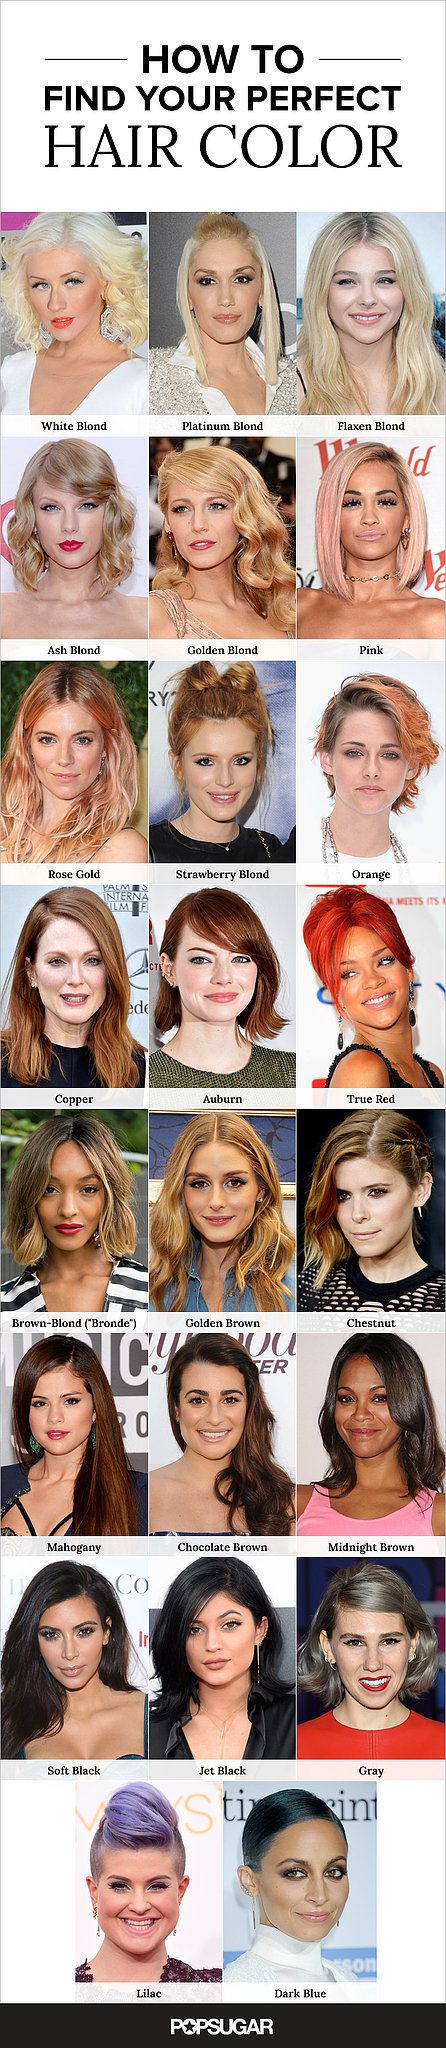 From the brightest blond to the darkest brunette, our hair-color guide covers them all.